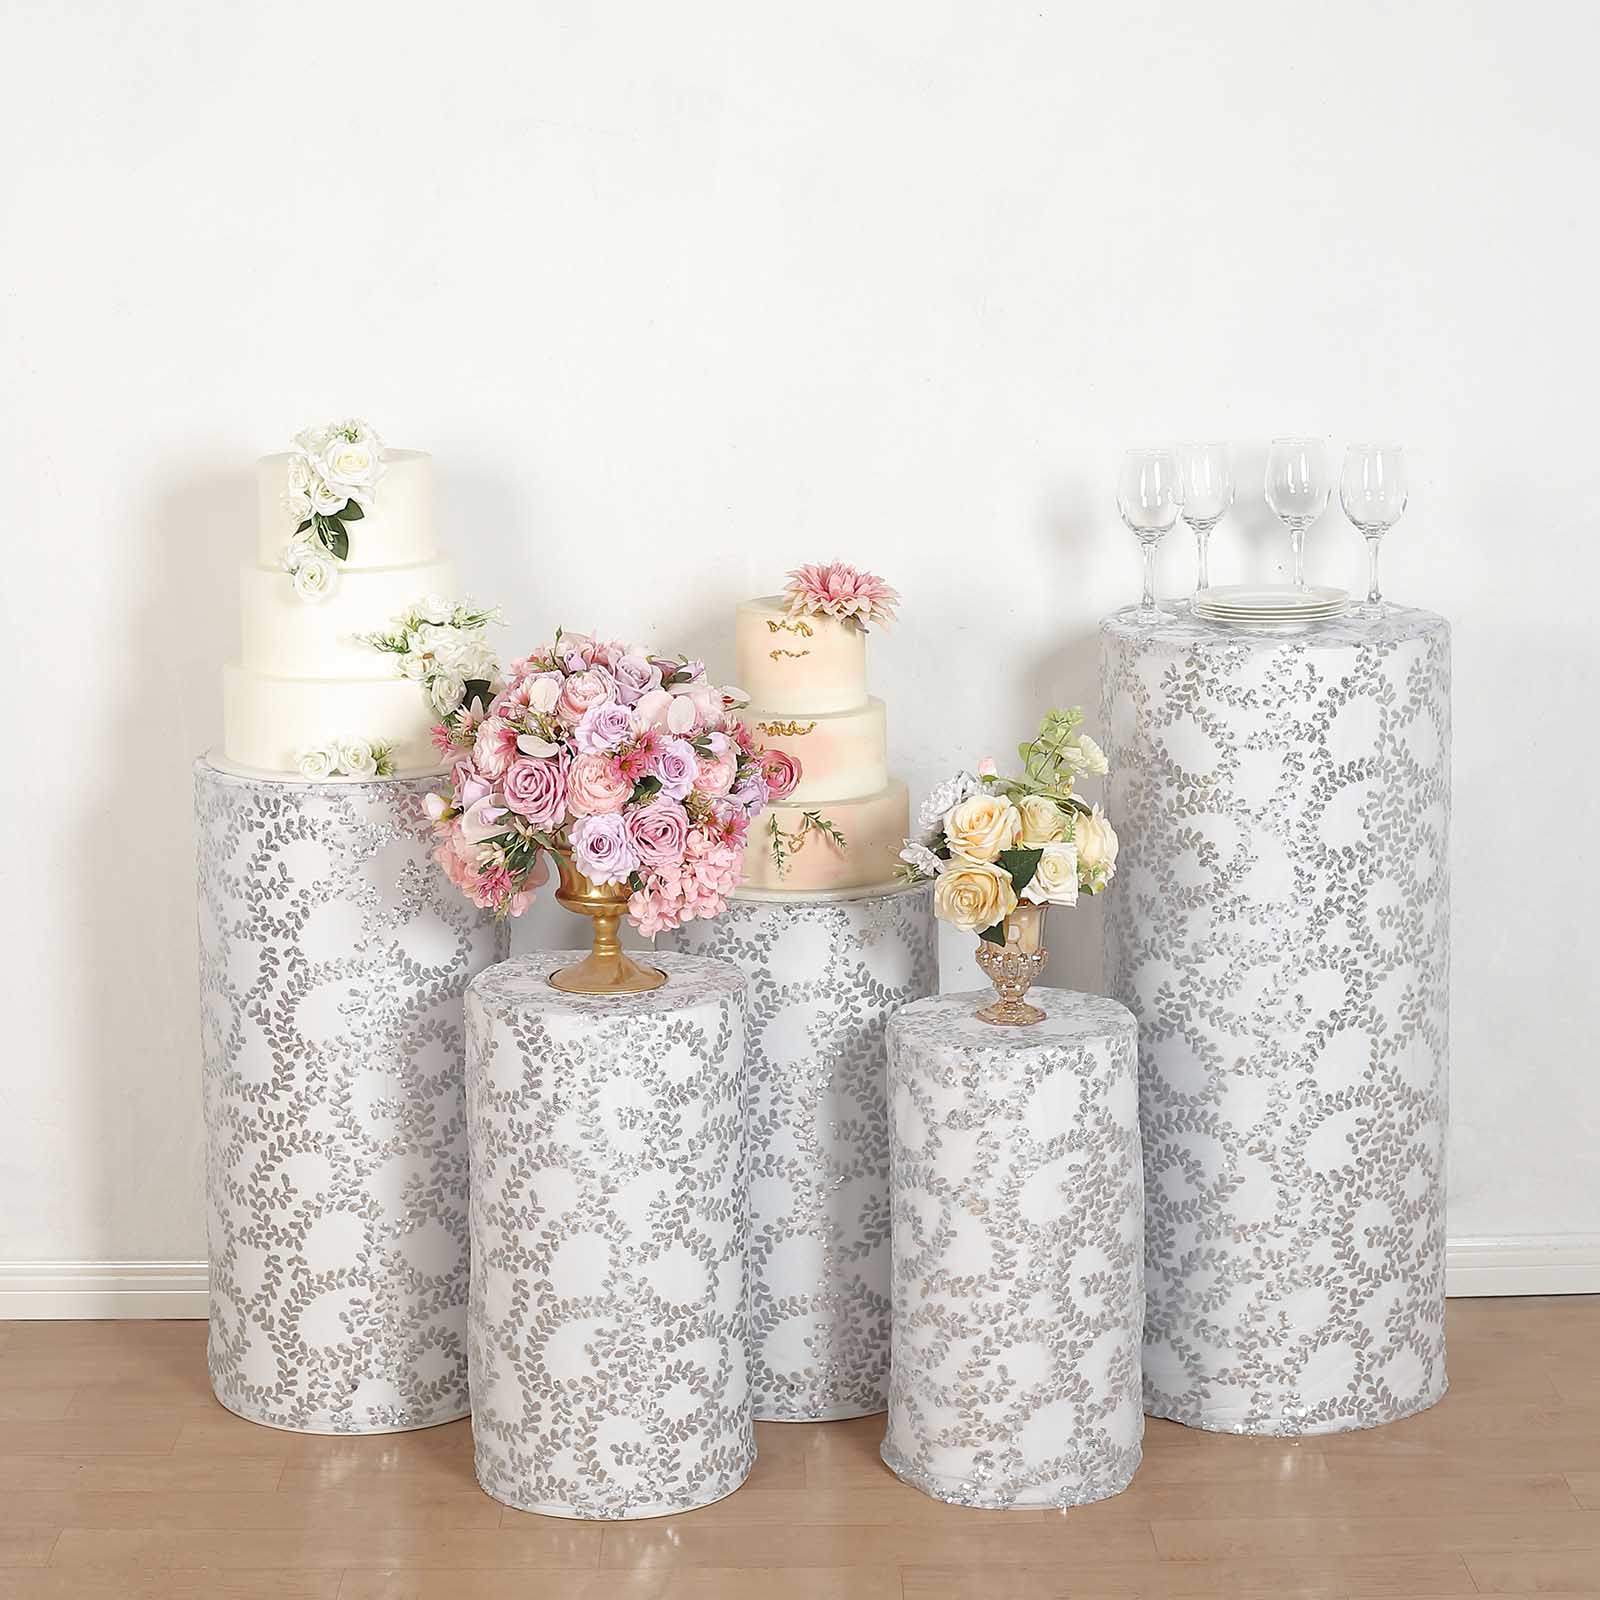 5 Sequin Mesh Cylinder Display Box Stand Covers with Leaf Vine Embroidery